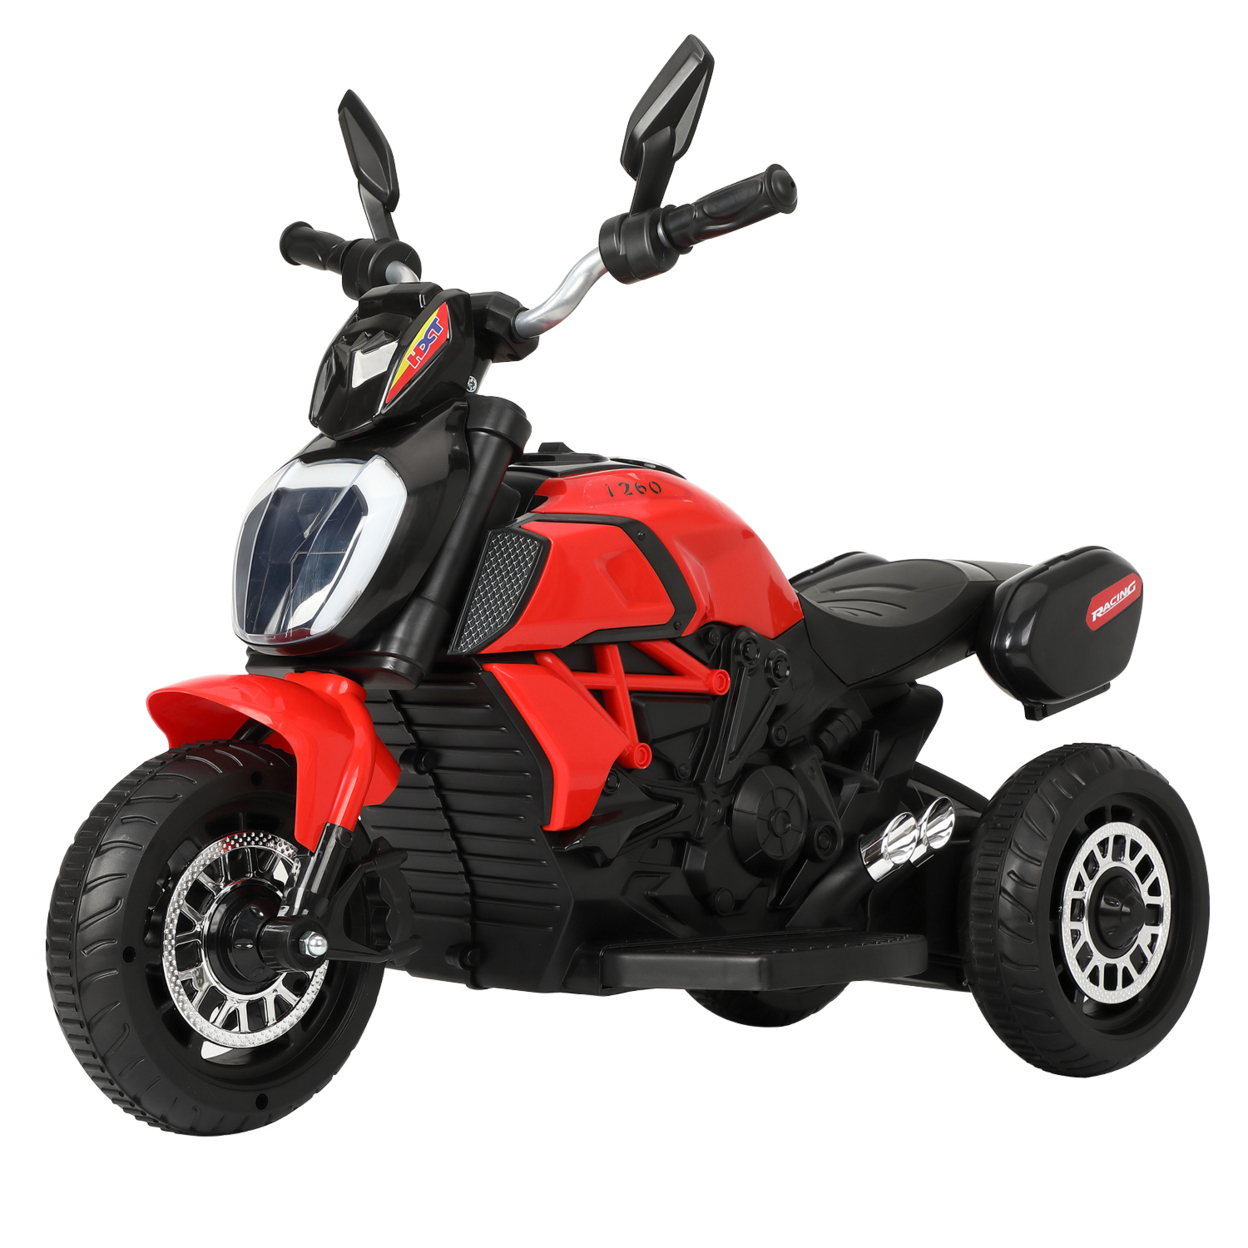 6V Kids Ride On Motorcycle with Headlights, Battery-Powered 3-Wheel Bicycle - Red